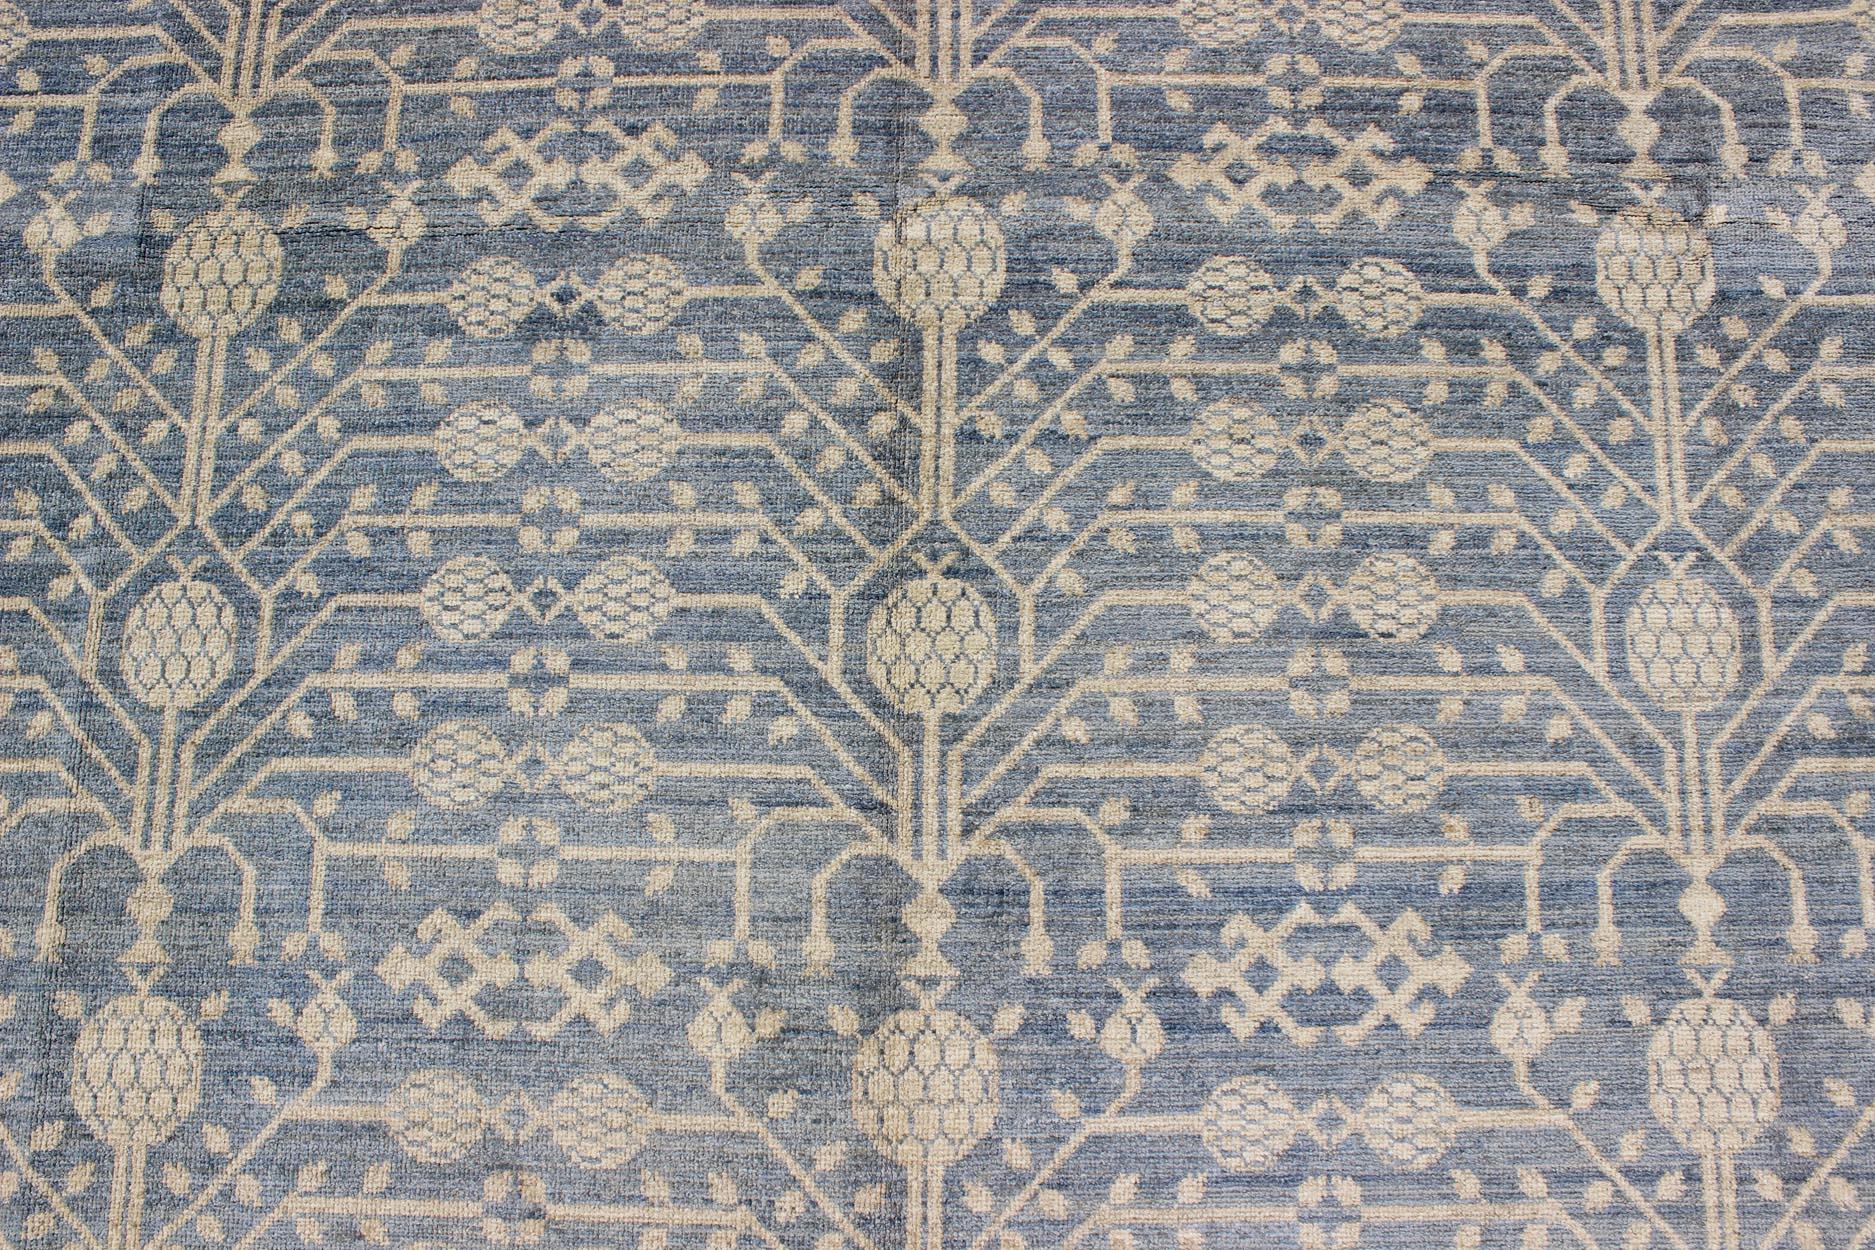 Wool Khotan Design Rug with All-Over Pomegranate Pattern in Blue, Tan & Taupe For Sale